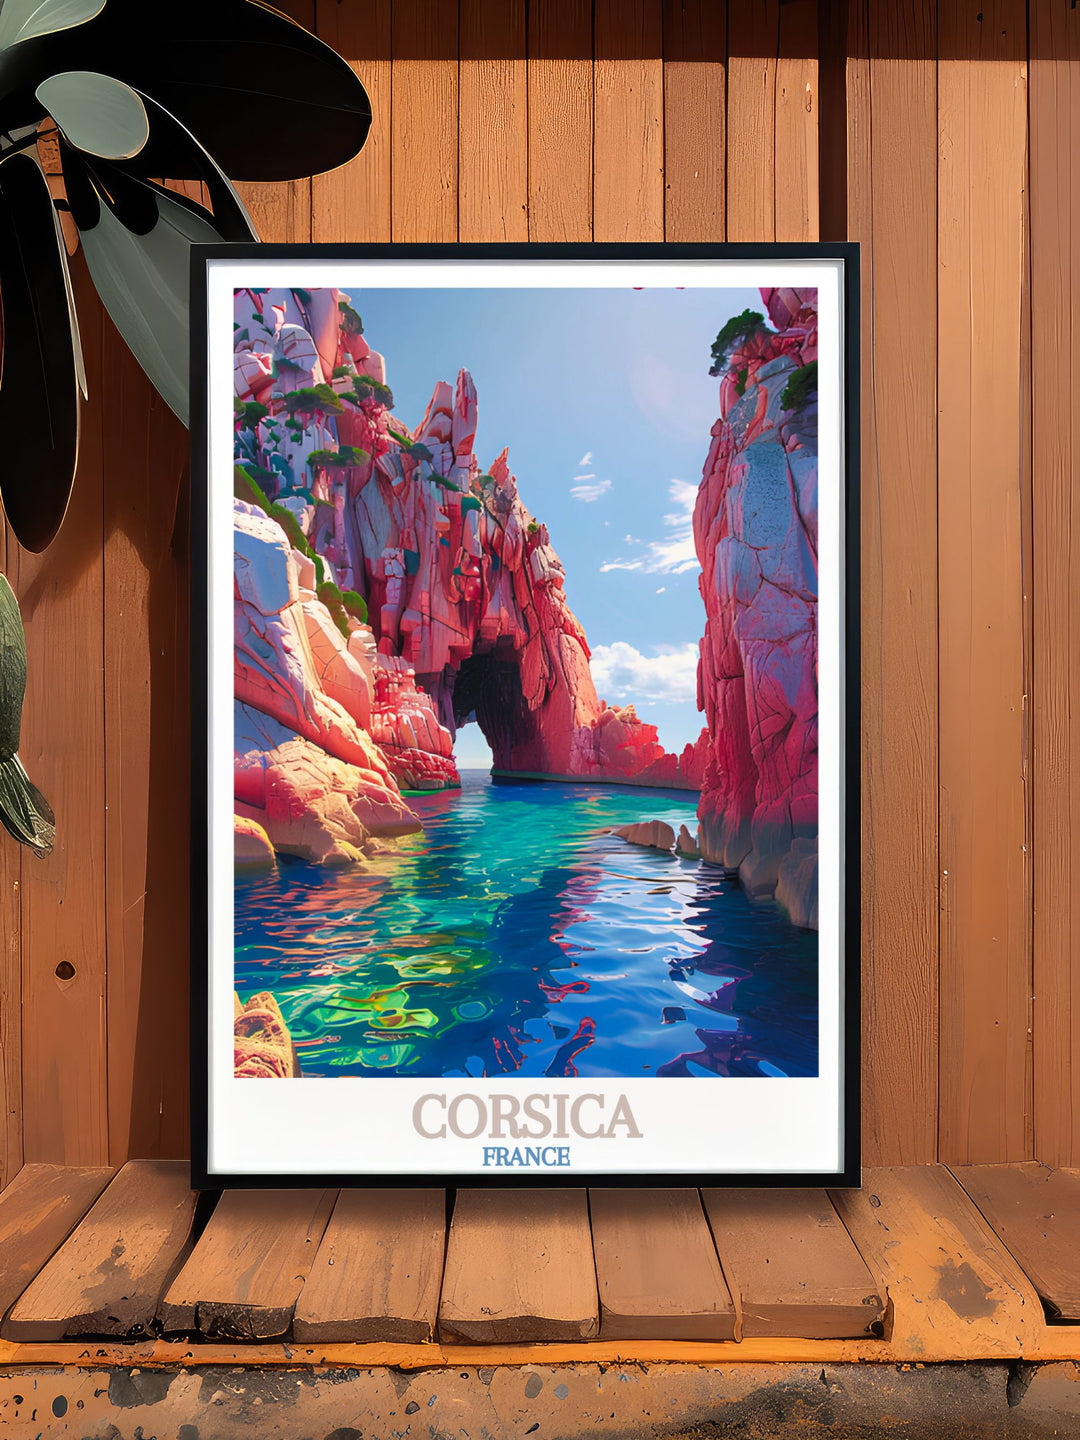 Exquisite Calanques de Piana framed print showcasing the stunning landscapes of Corsica France an ideal piece for any art collection perfect for enhancing your home decor with a touch of natural beauty